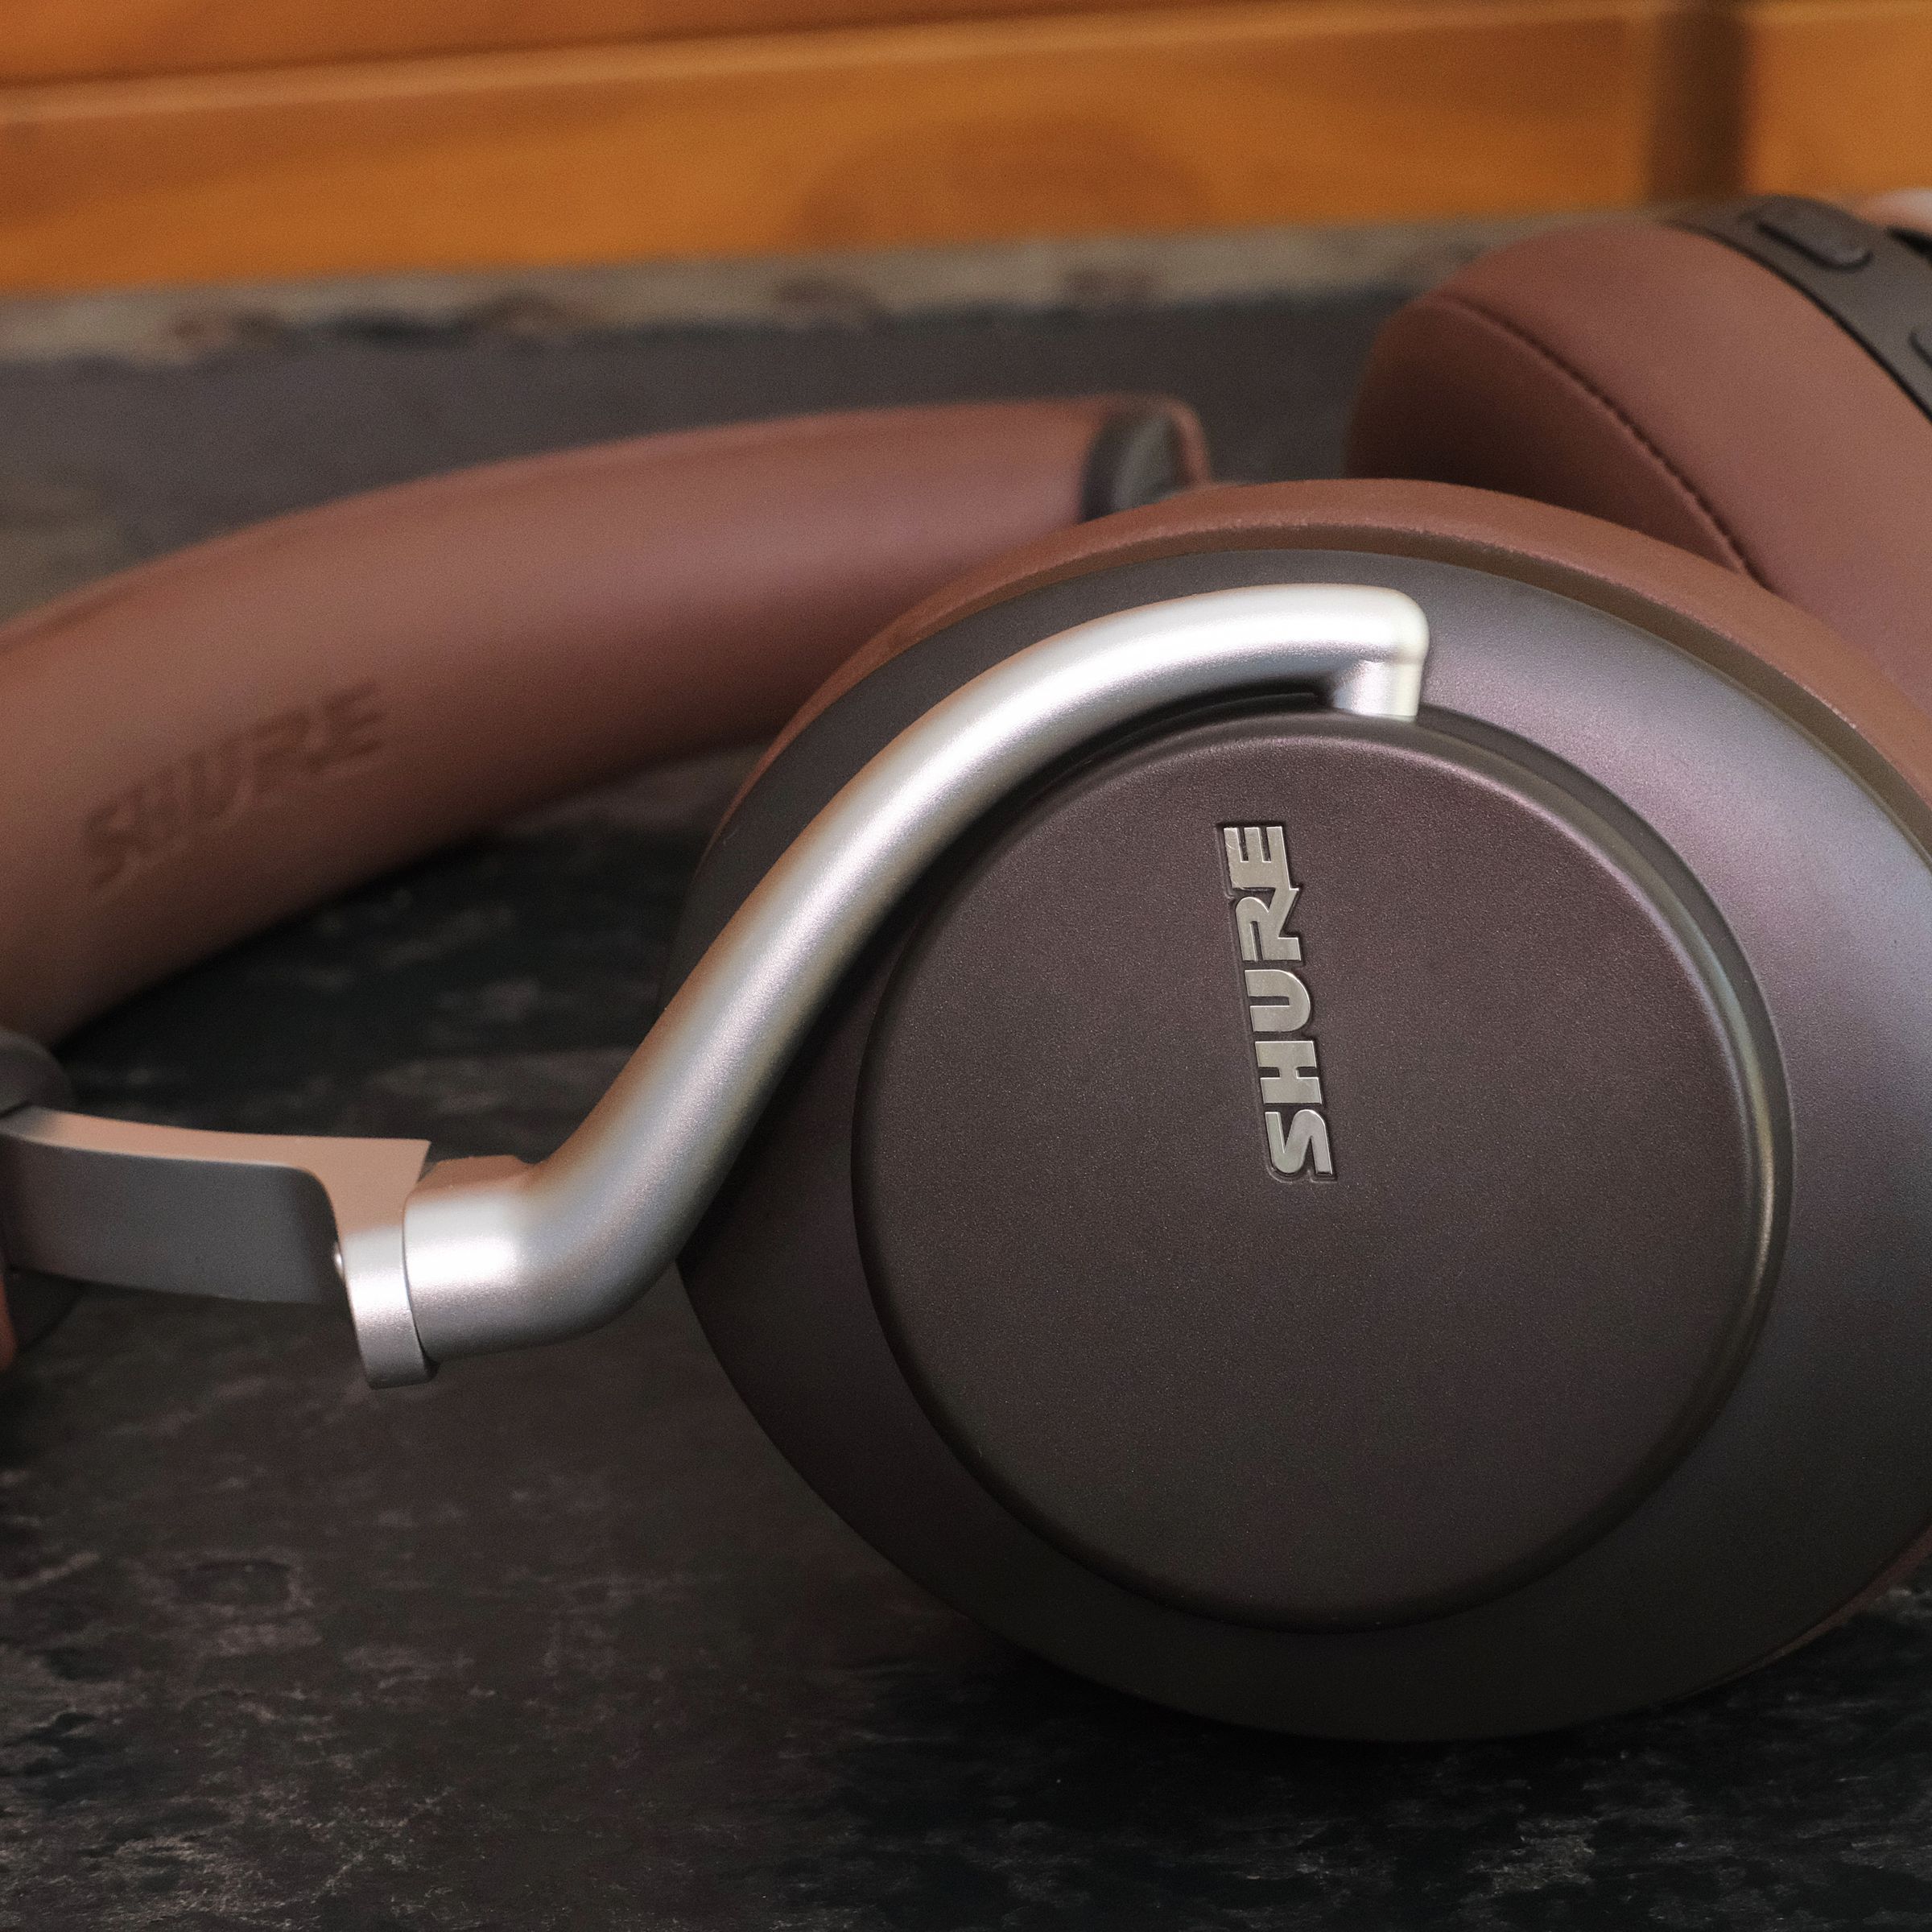 A photo of Shure’s Aonic 50 headphones, the best noise-canceling headphones for sound quality.